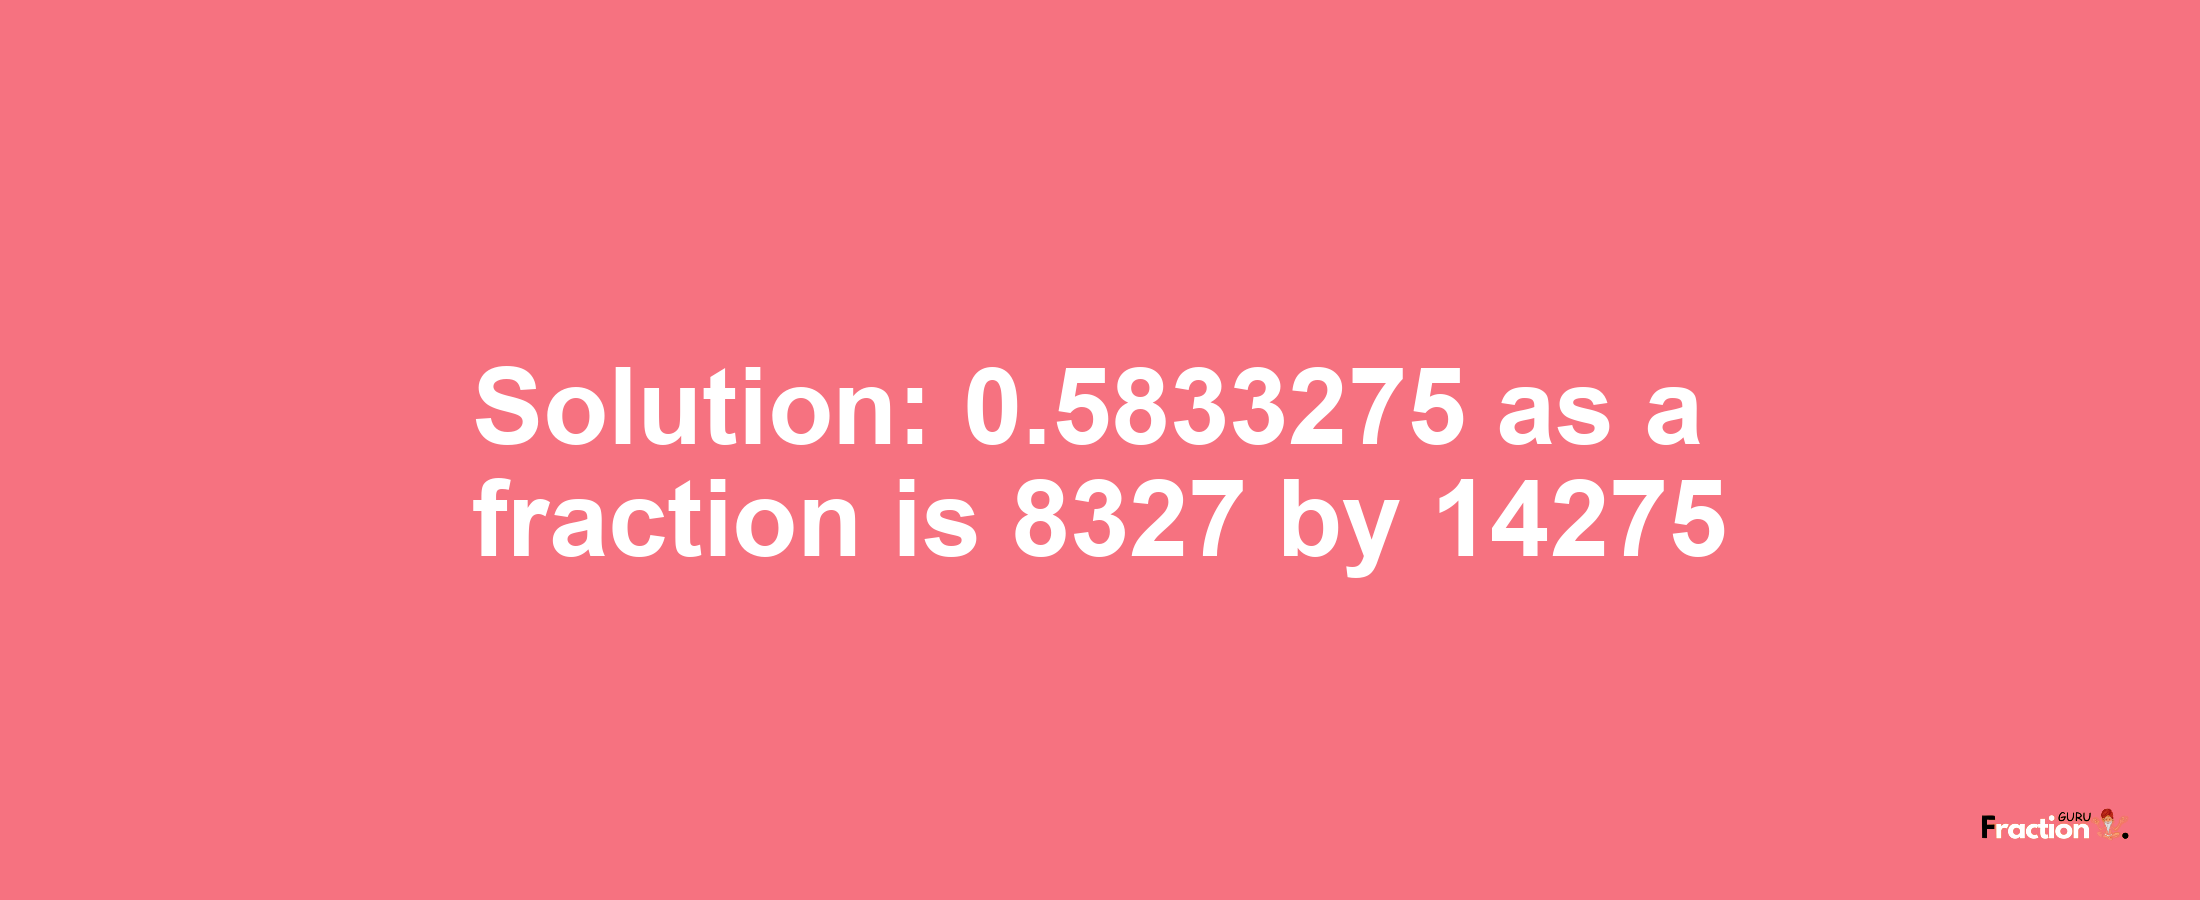 Solution:0.5833275 as a fraction is 8327/14275